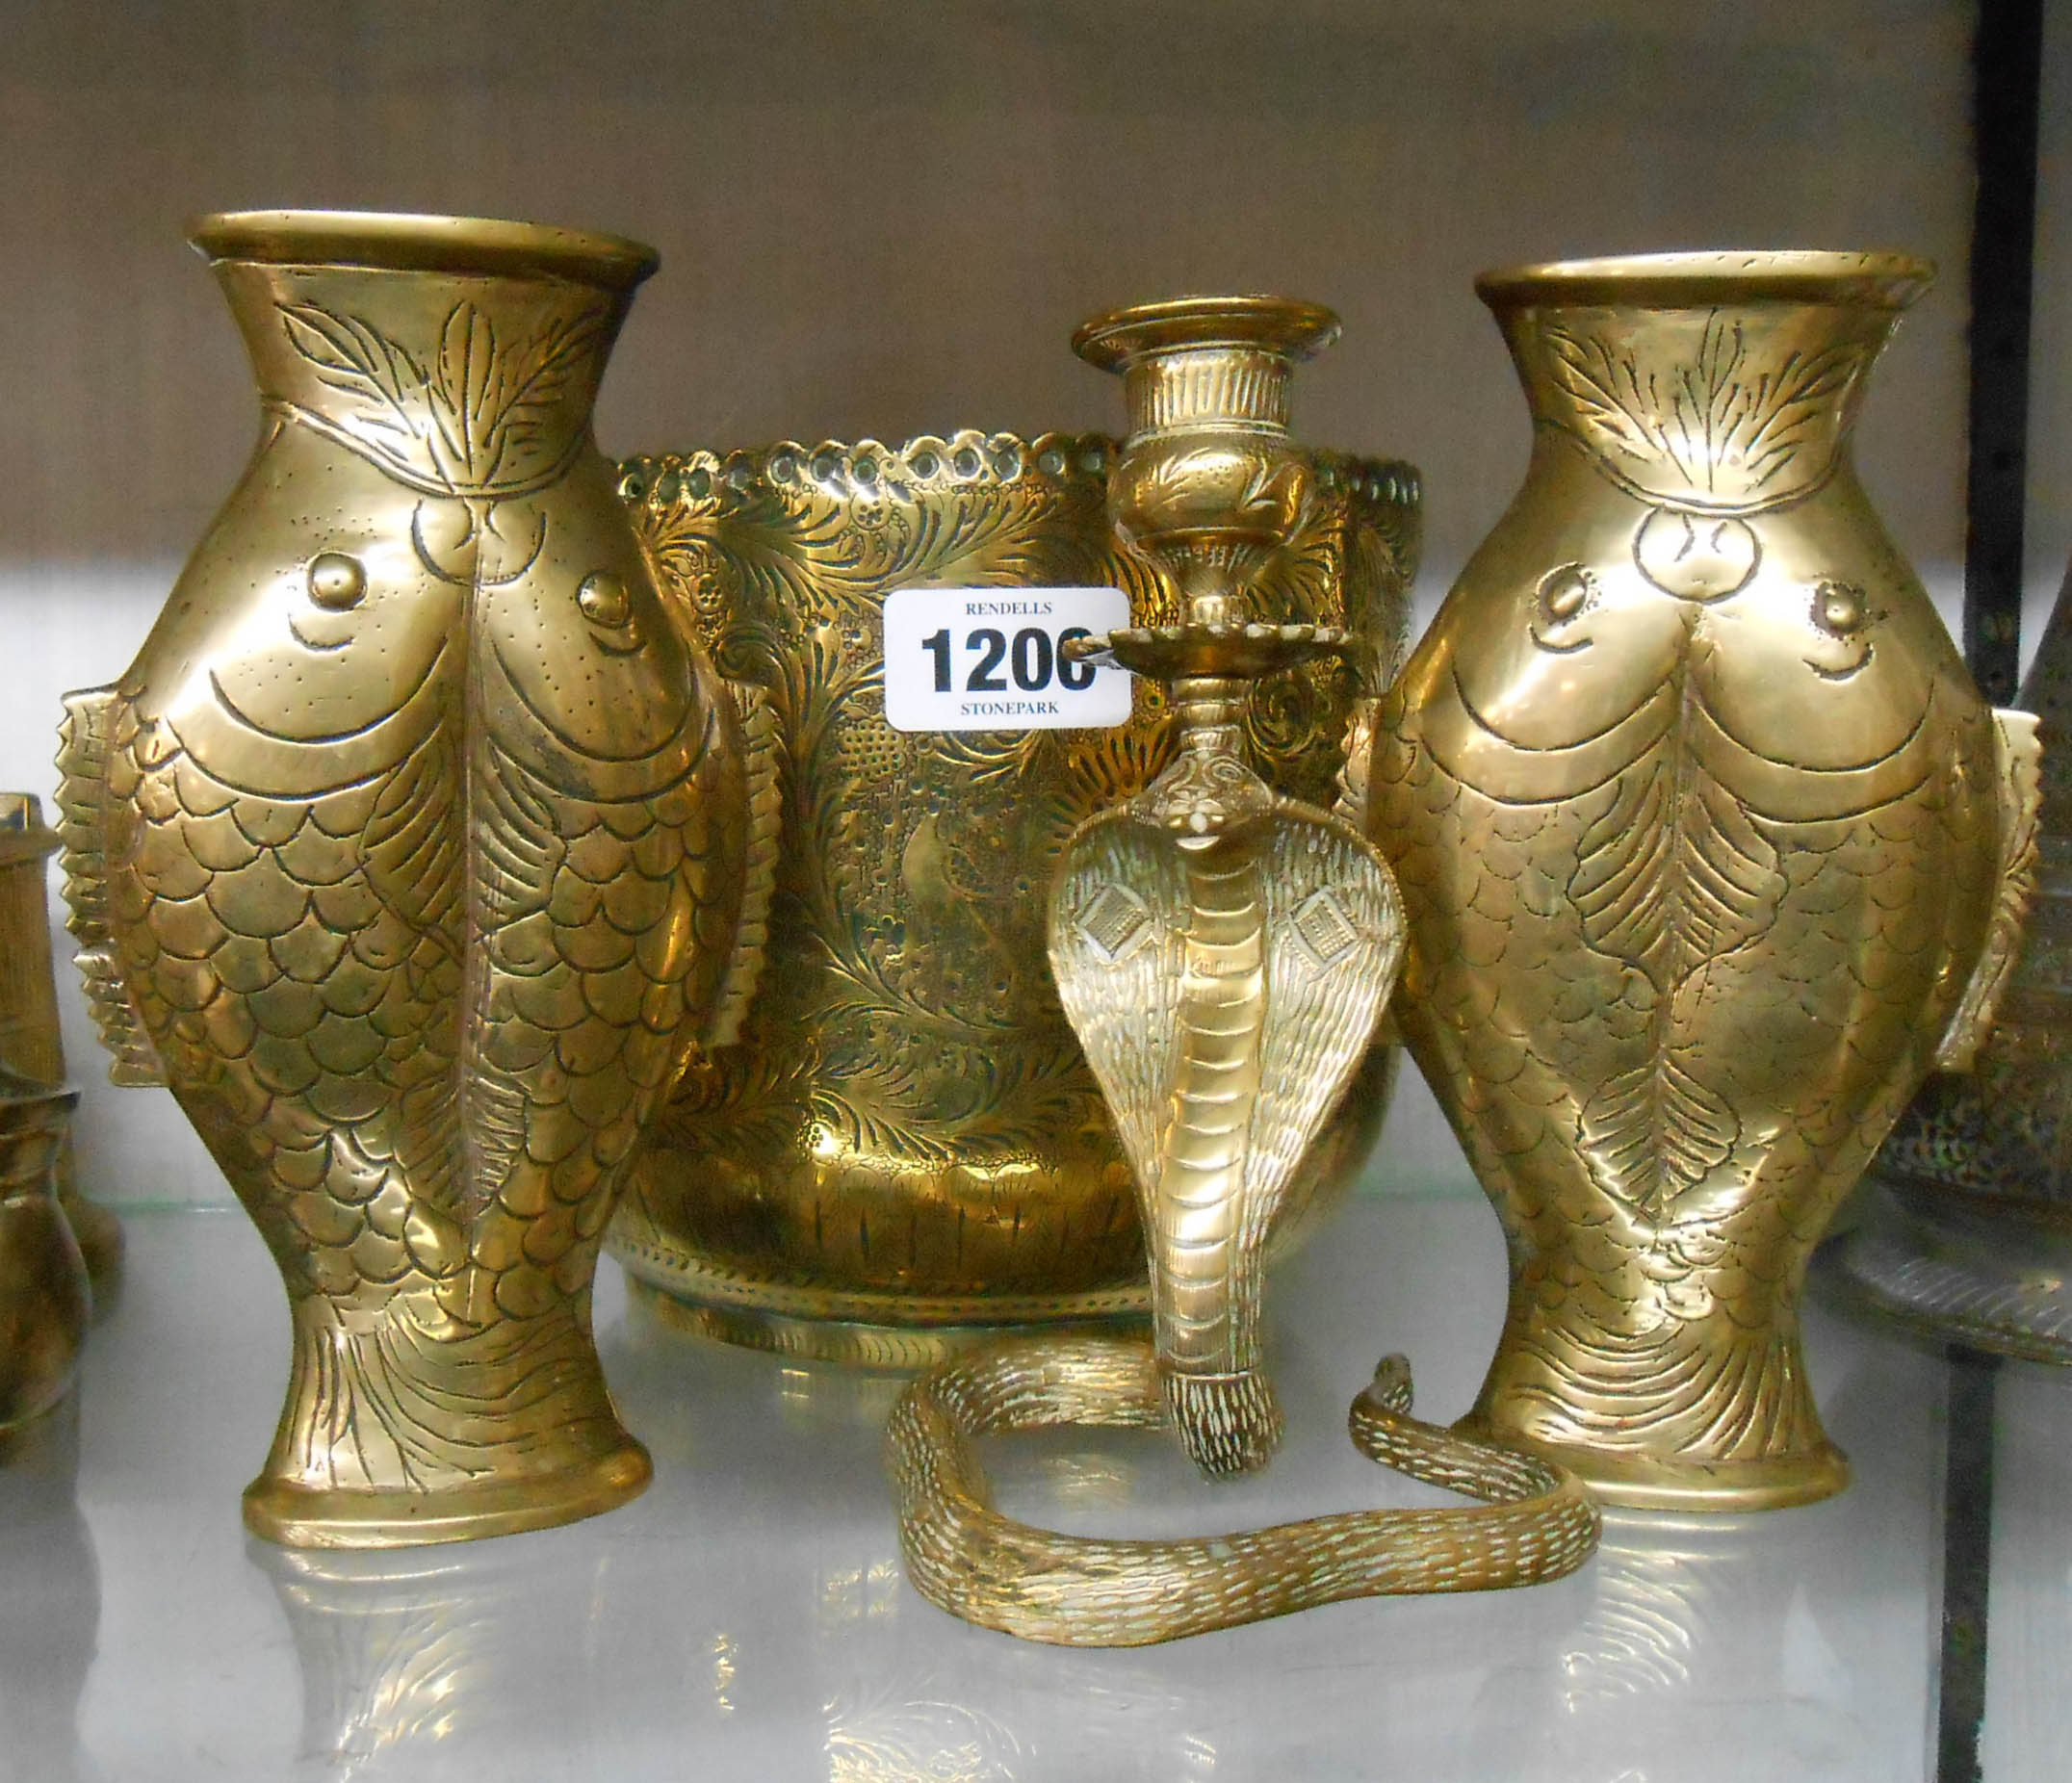 A pair of brass fish pattern vases - sold with an Eastern plant pot holder and a cobra pattern